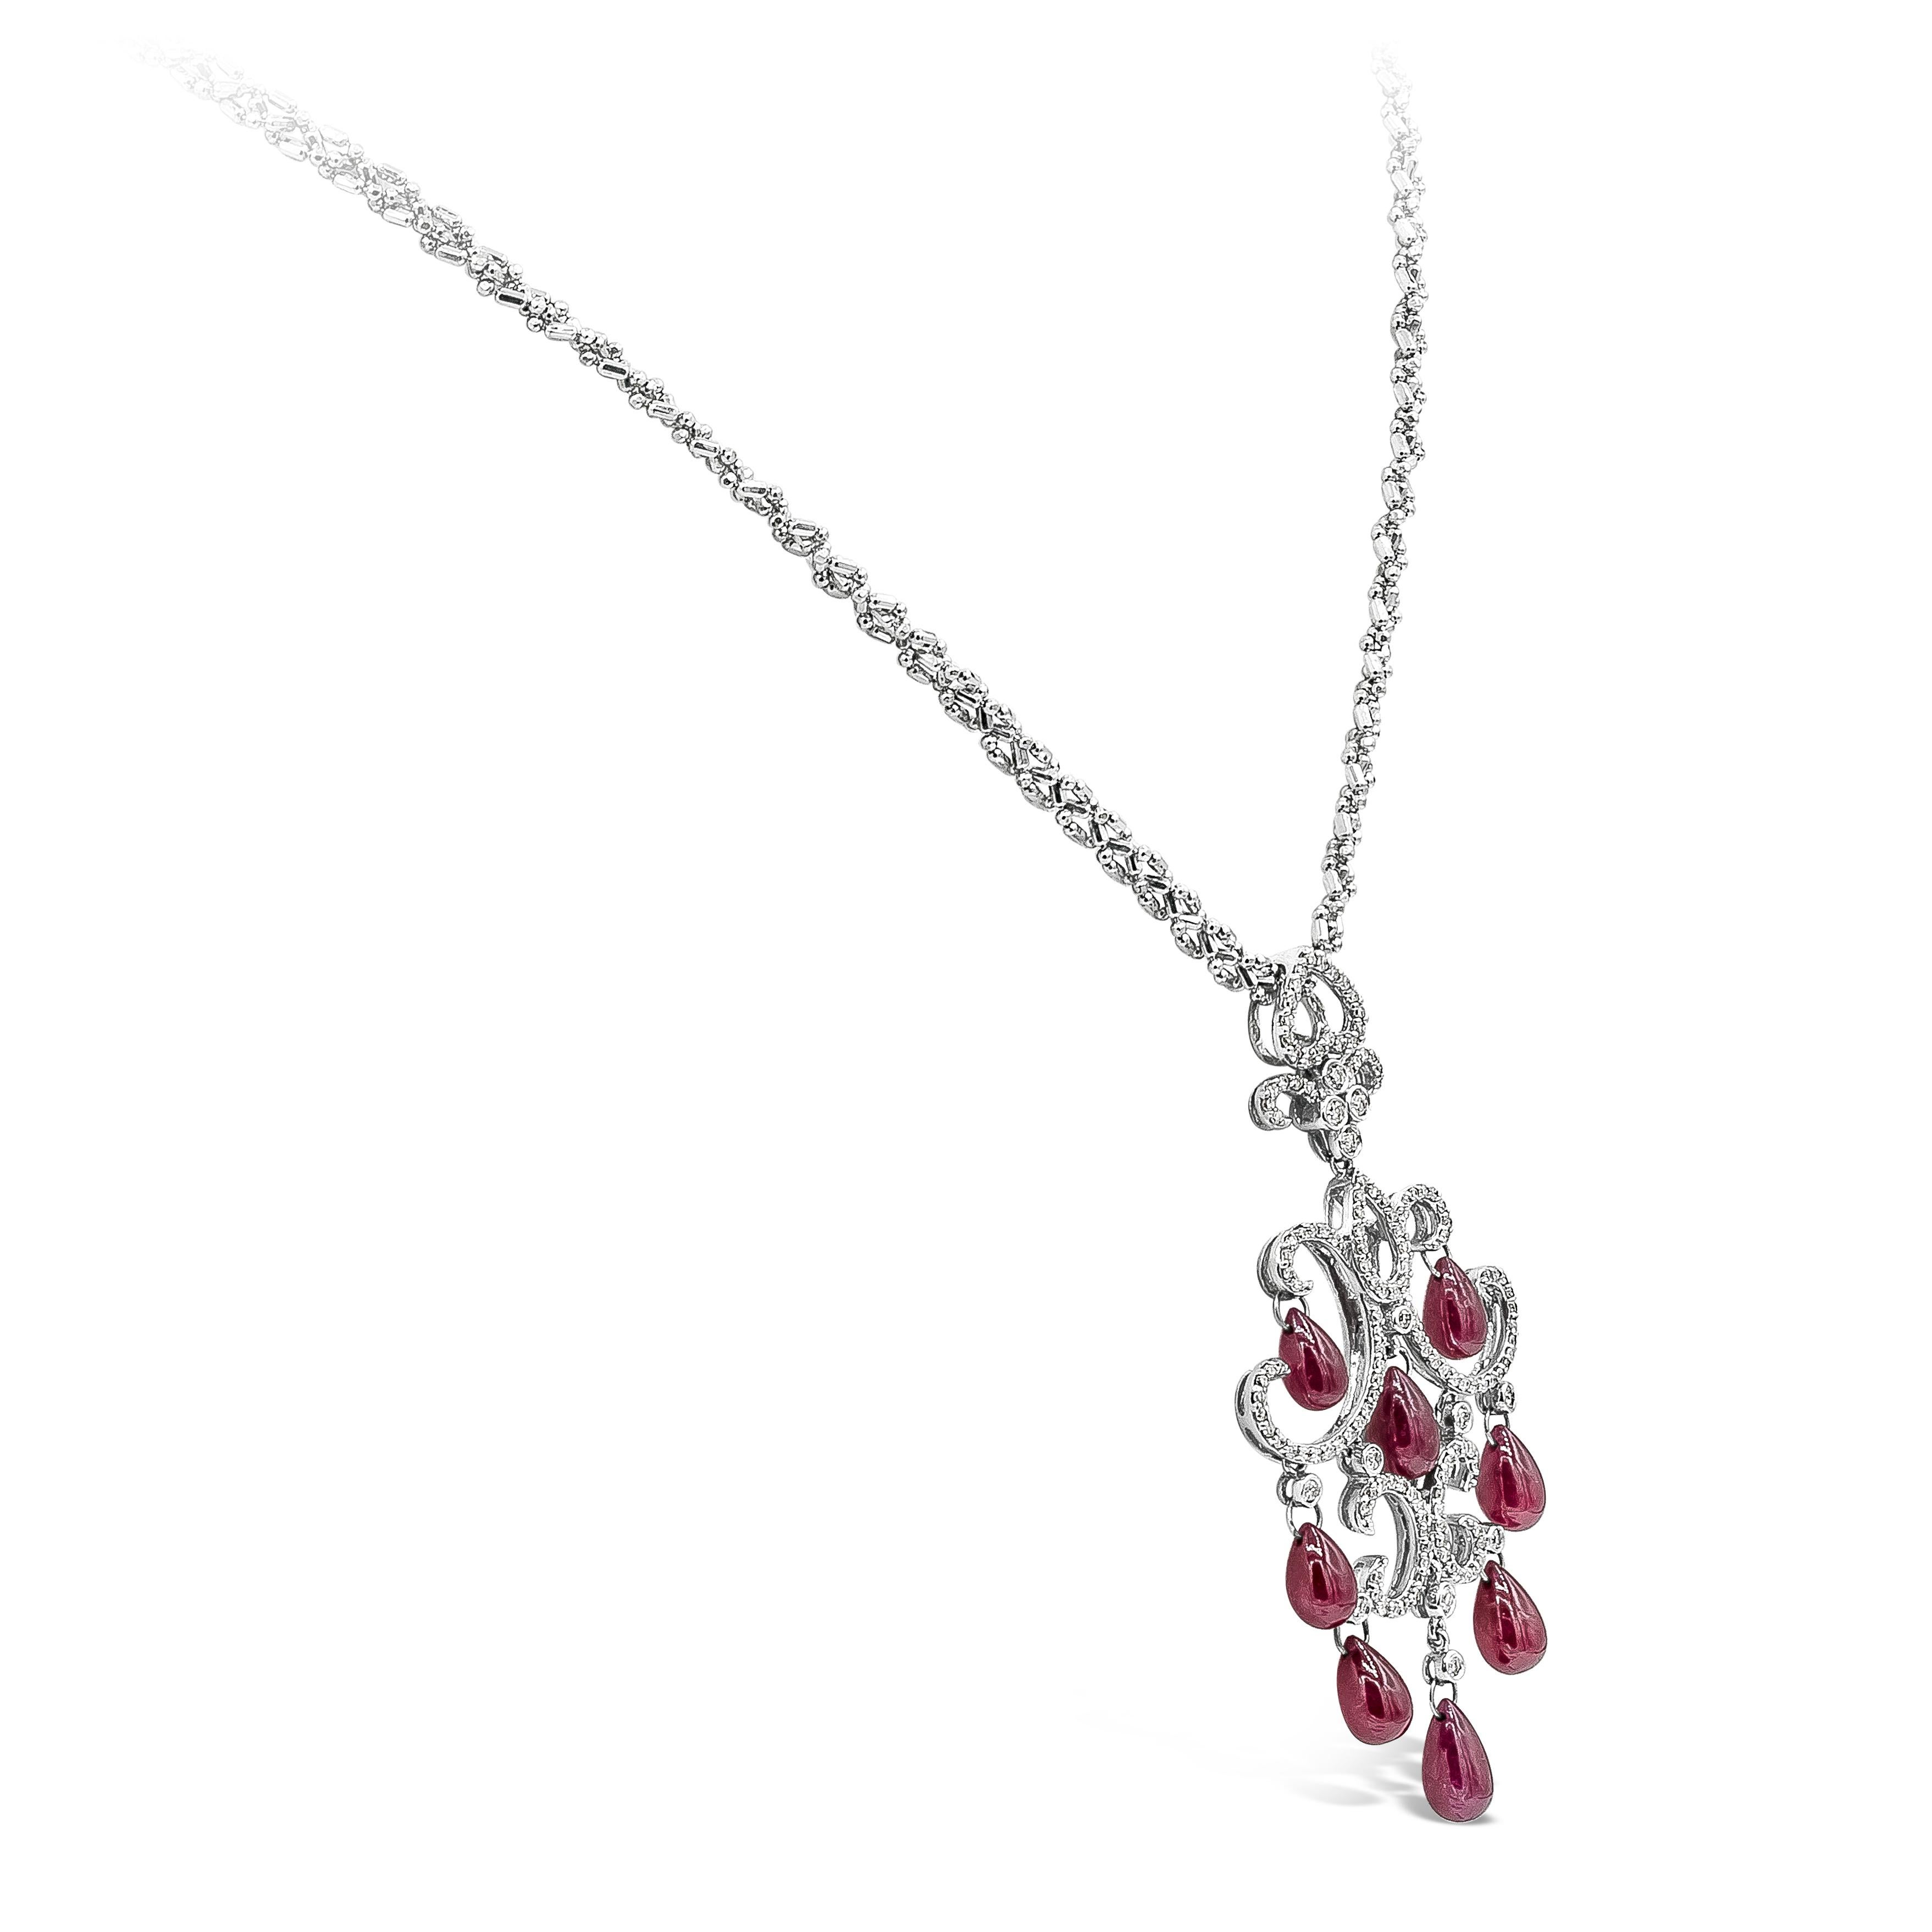 An intricately designed piece encrusted with round brilliant diamonds weighing 0.80 carats total. Finished with color-rich ruby briolettes weighing 16.25 carats total. Pendant length of 2.5 inches and chain length of 19 inches. Made in 18K white